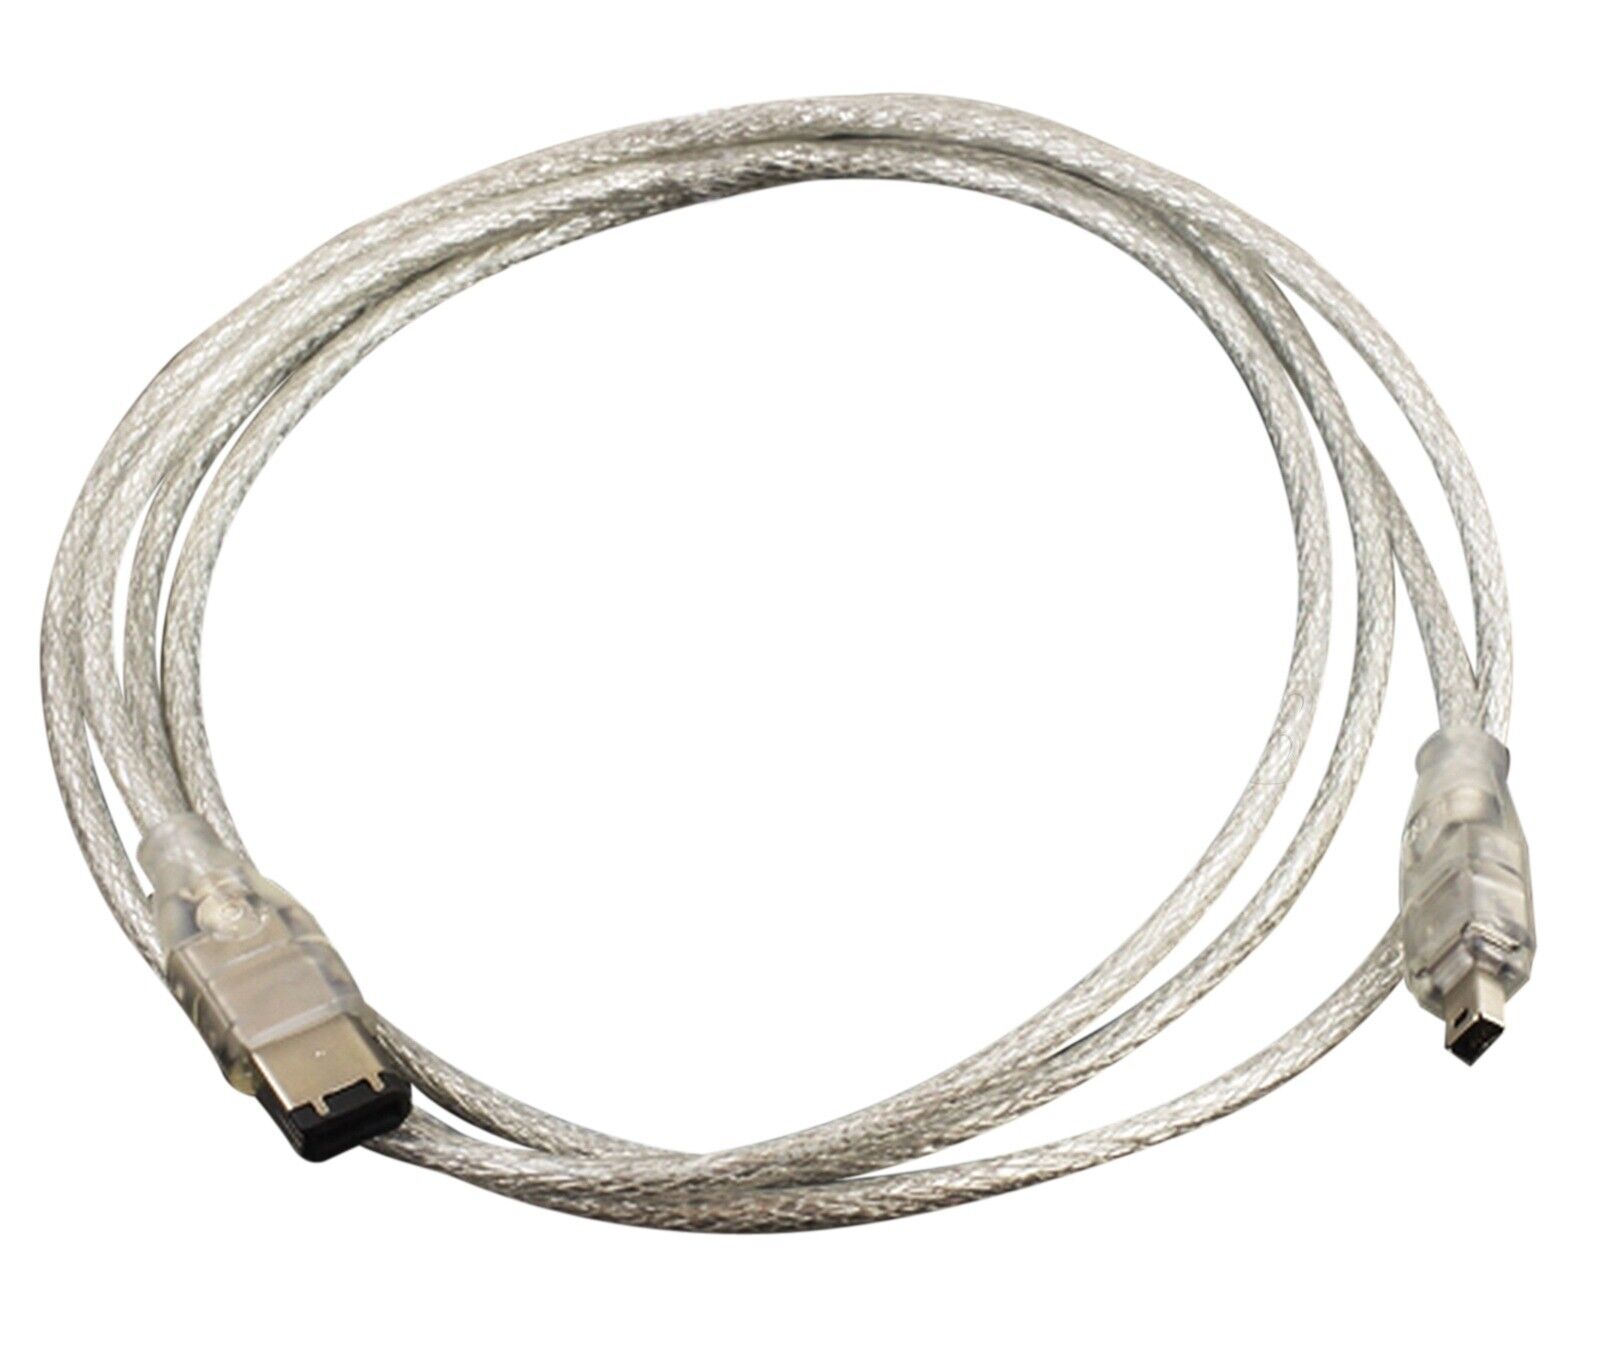 6 to 4 Pin IEEE 1394 Firewire iLink Adapter Cable 3 FT  PC MAC DV c15